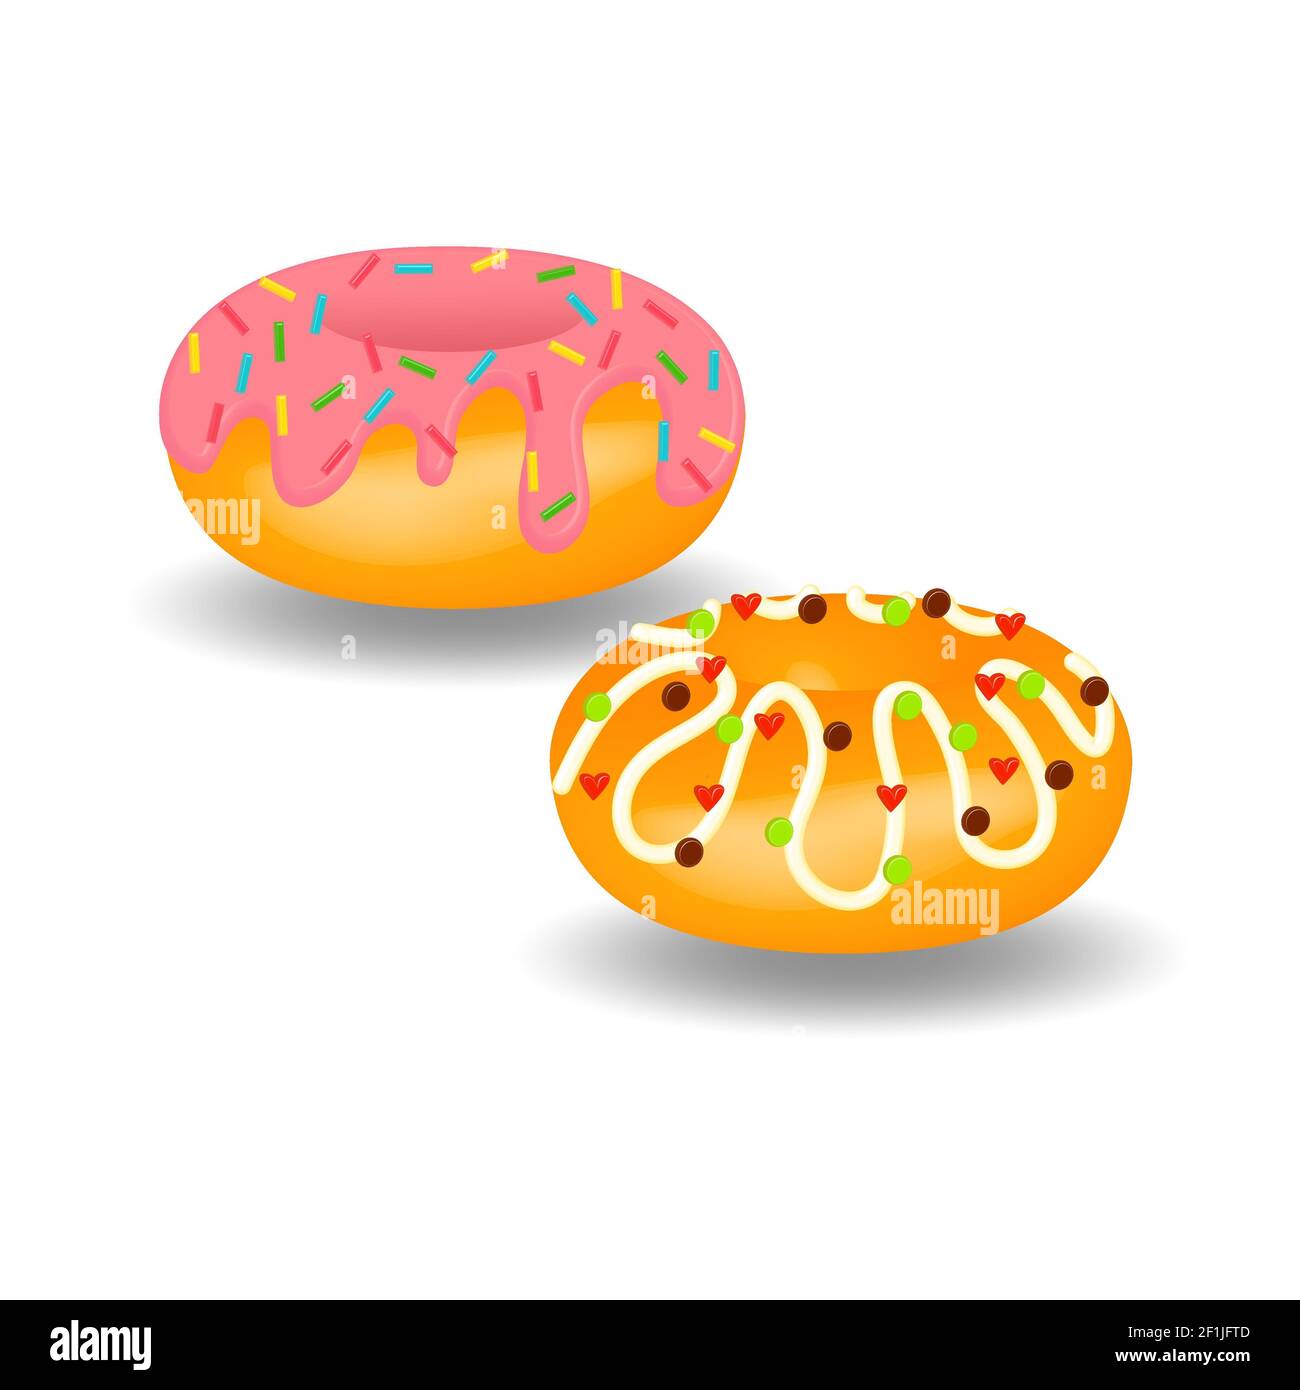 Glazed sweet tasty donuts with pink fondant isolated on white background close-up. For advertising, menus, poster of cafes, restaurants and eateries. Stock Photo